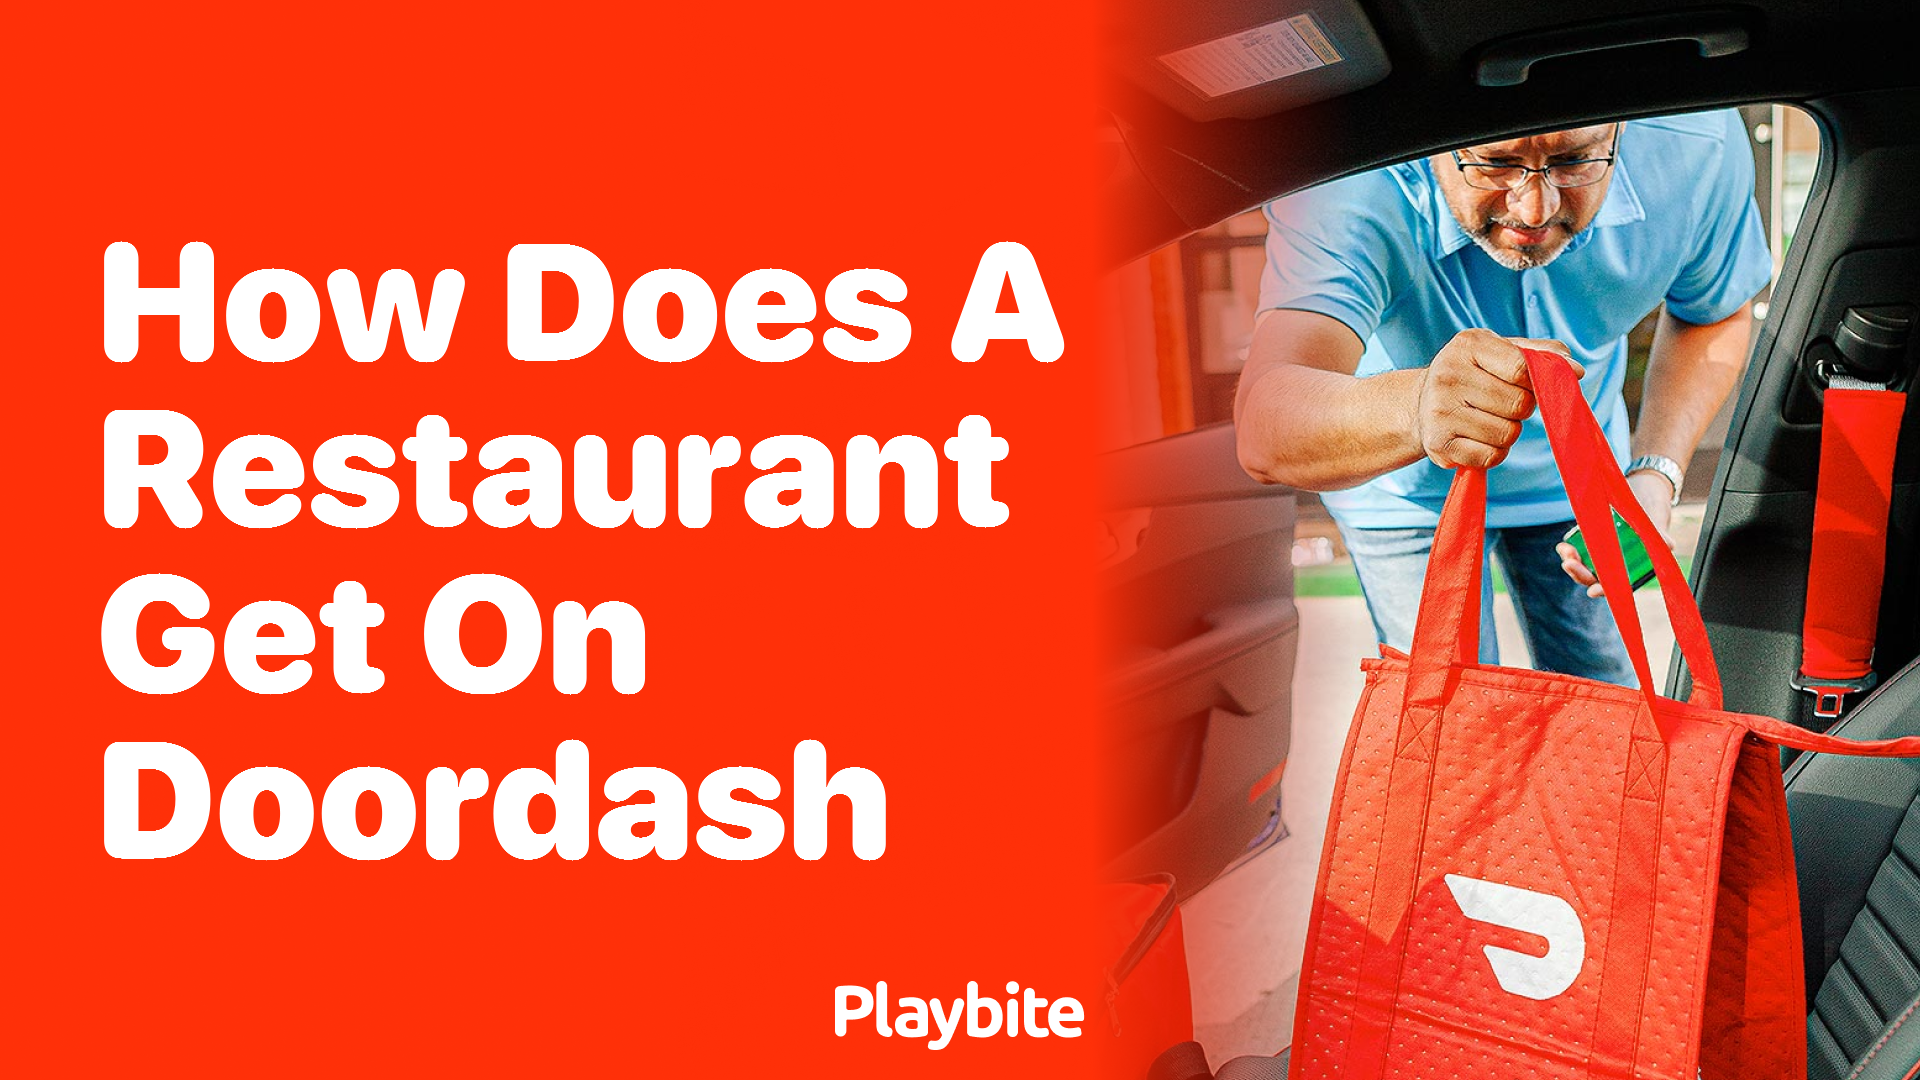 How Does a Restaurant Get on DoorDash? Your Quick Guide!